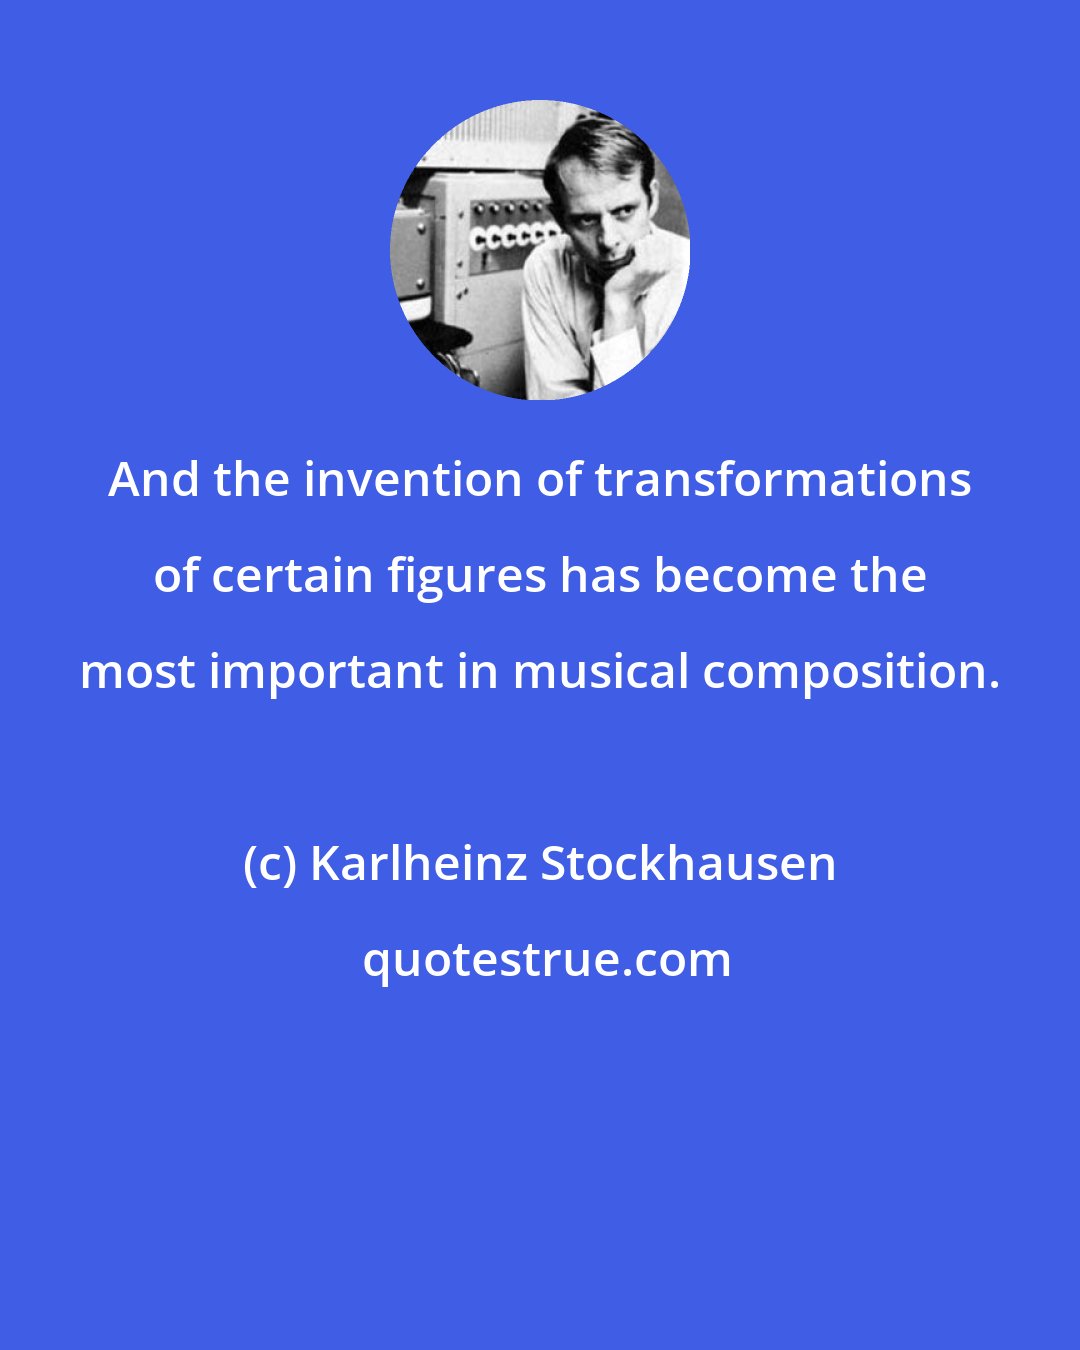 Karlheinz Stockhausen: And the invention of transformations of certain figures has become the most important in musical composition.